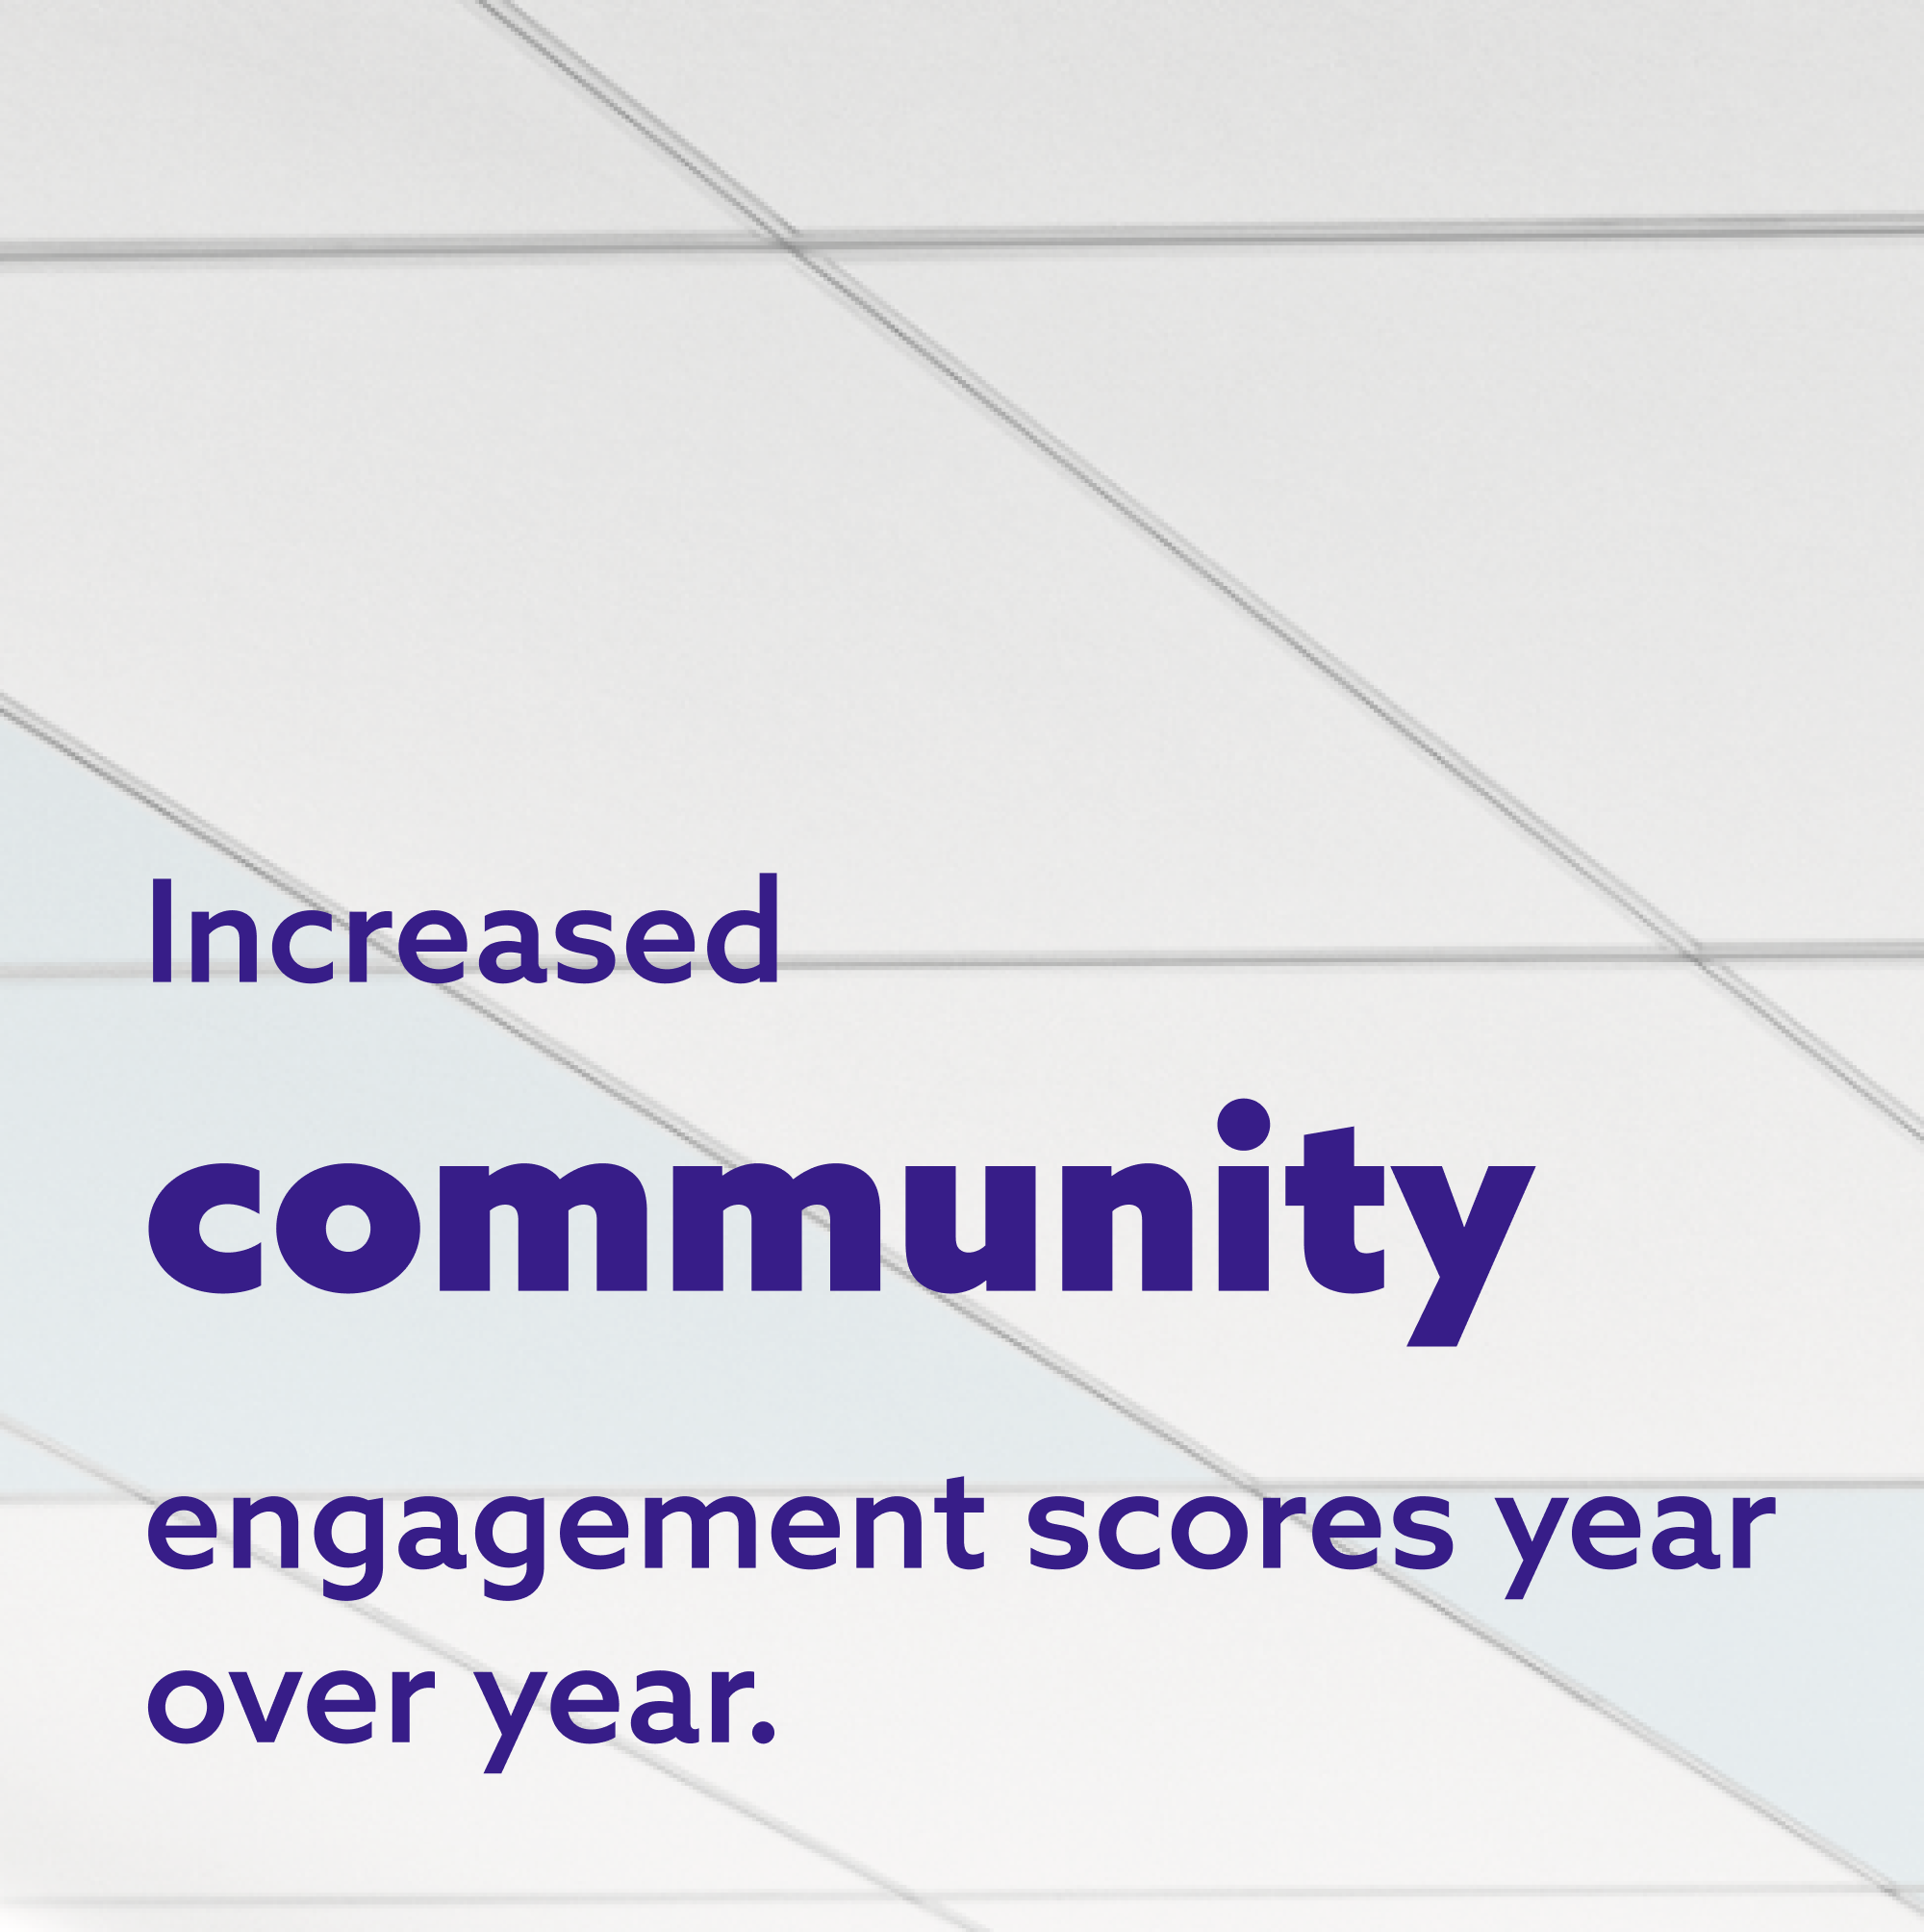 Increased community engagement scores year over year.